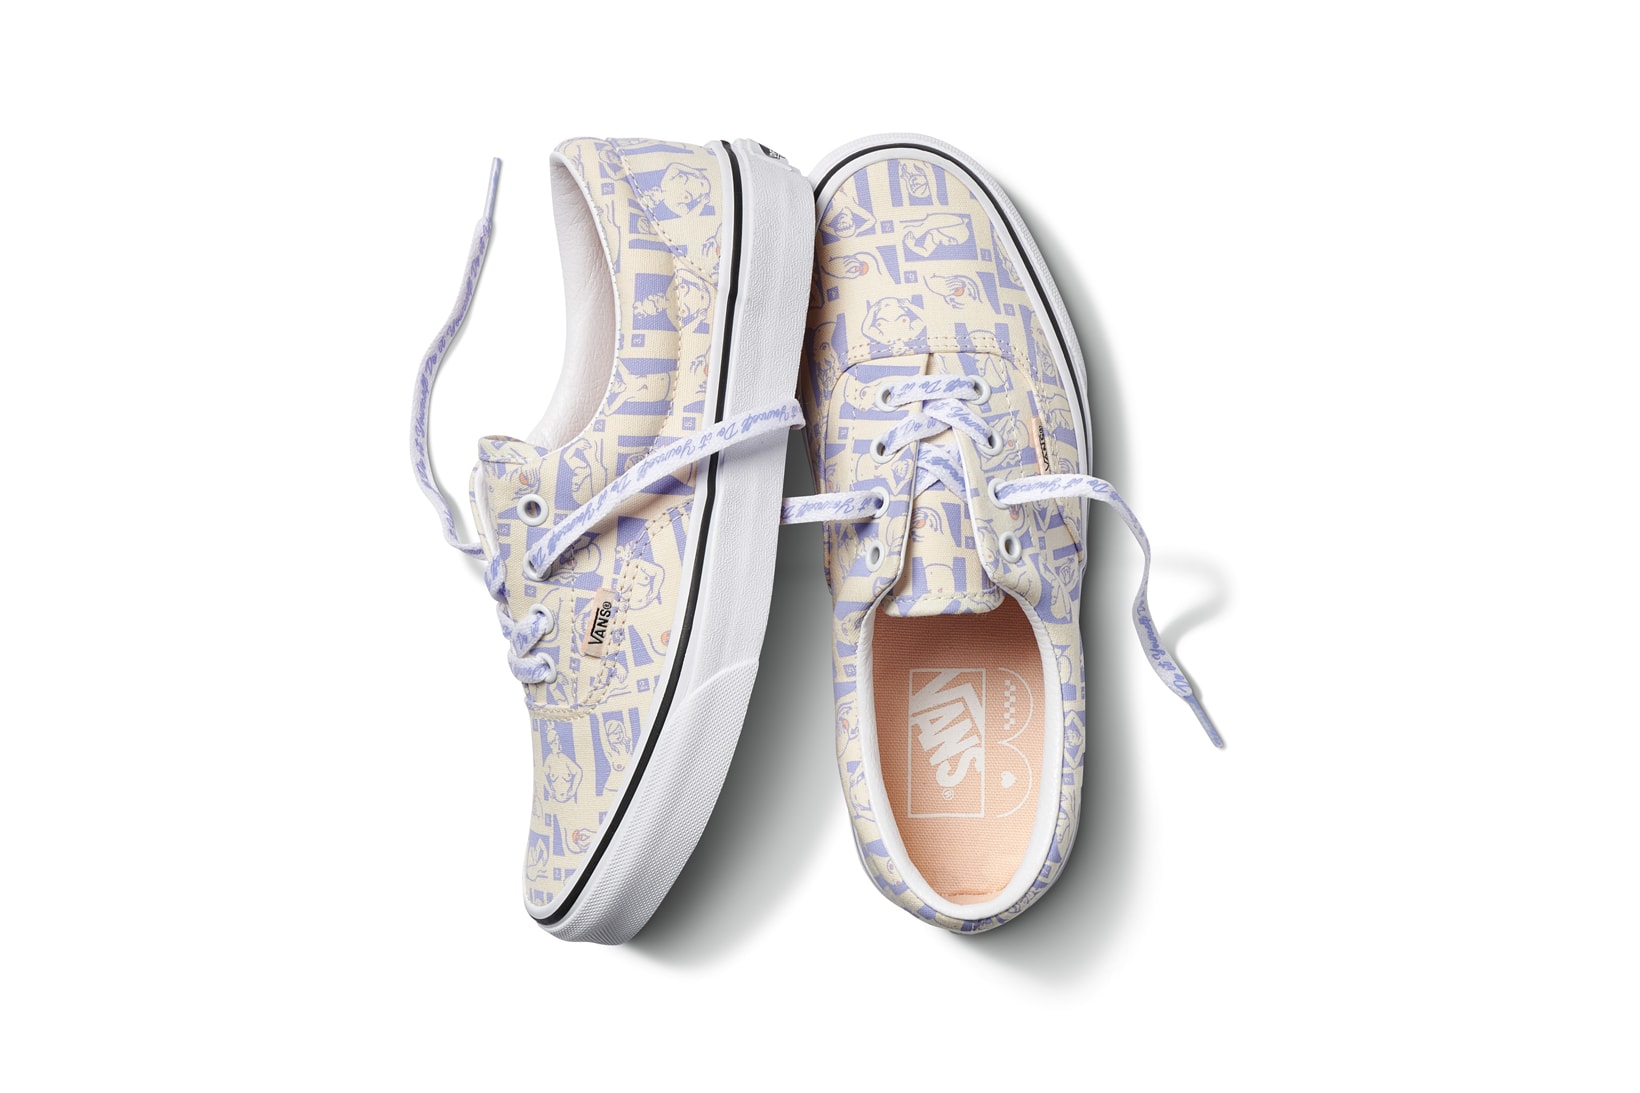 CoppaFeel! x Vans Breast Cancer Awareness Collection Era Blue White